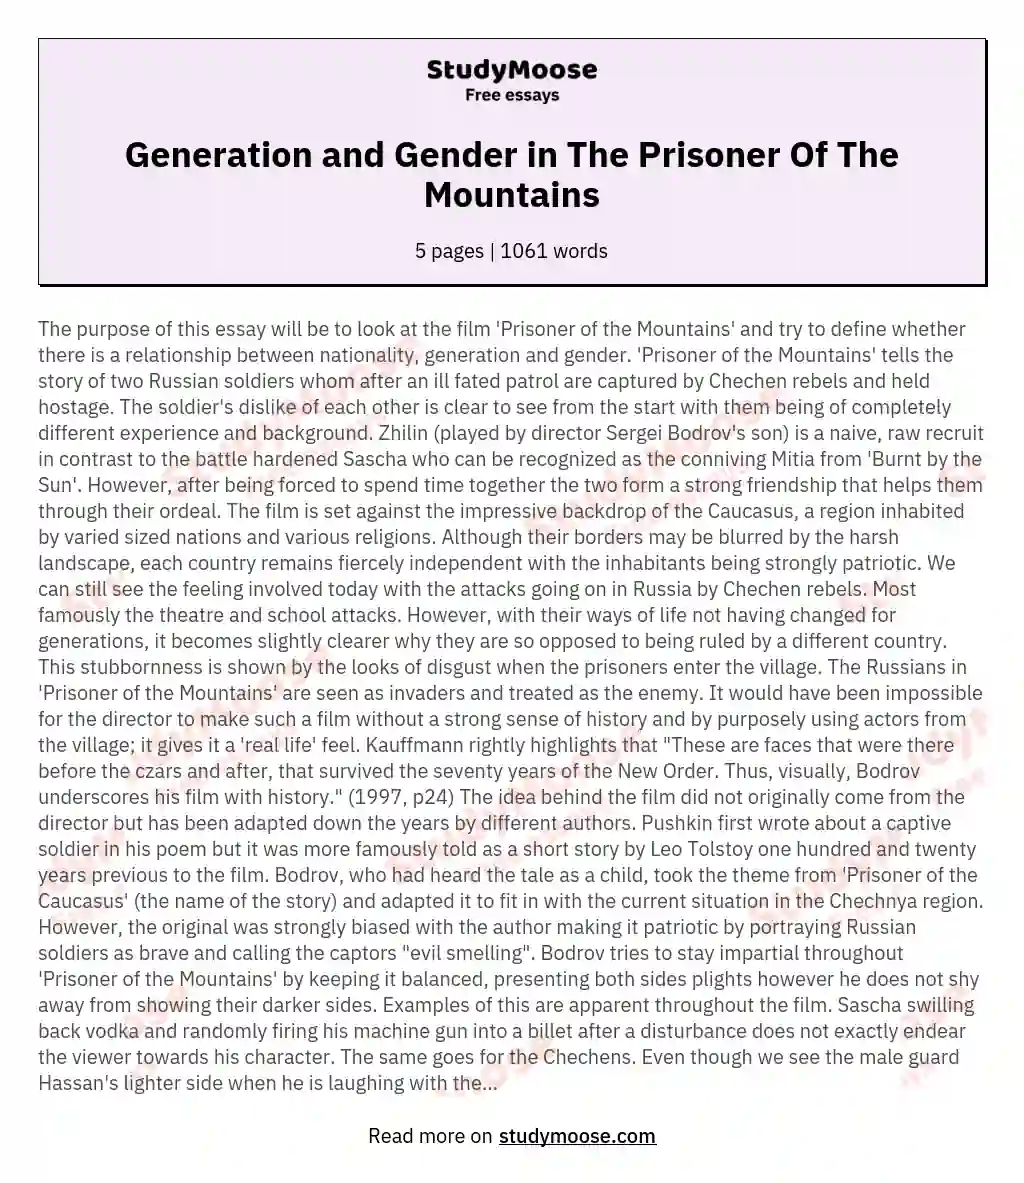 Generation and Gender in The Prisoner Of The Mountains